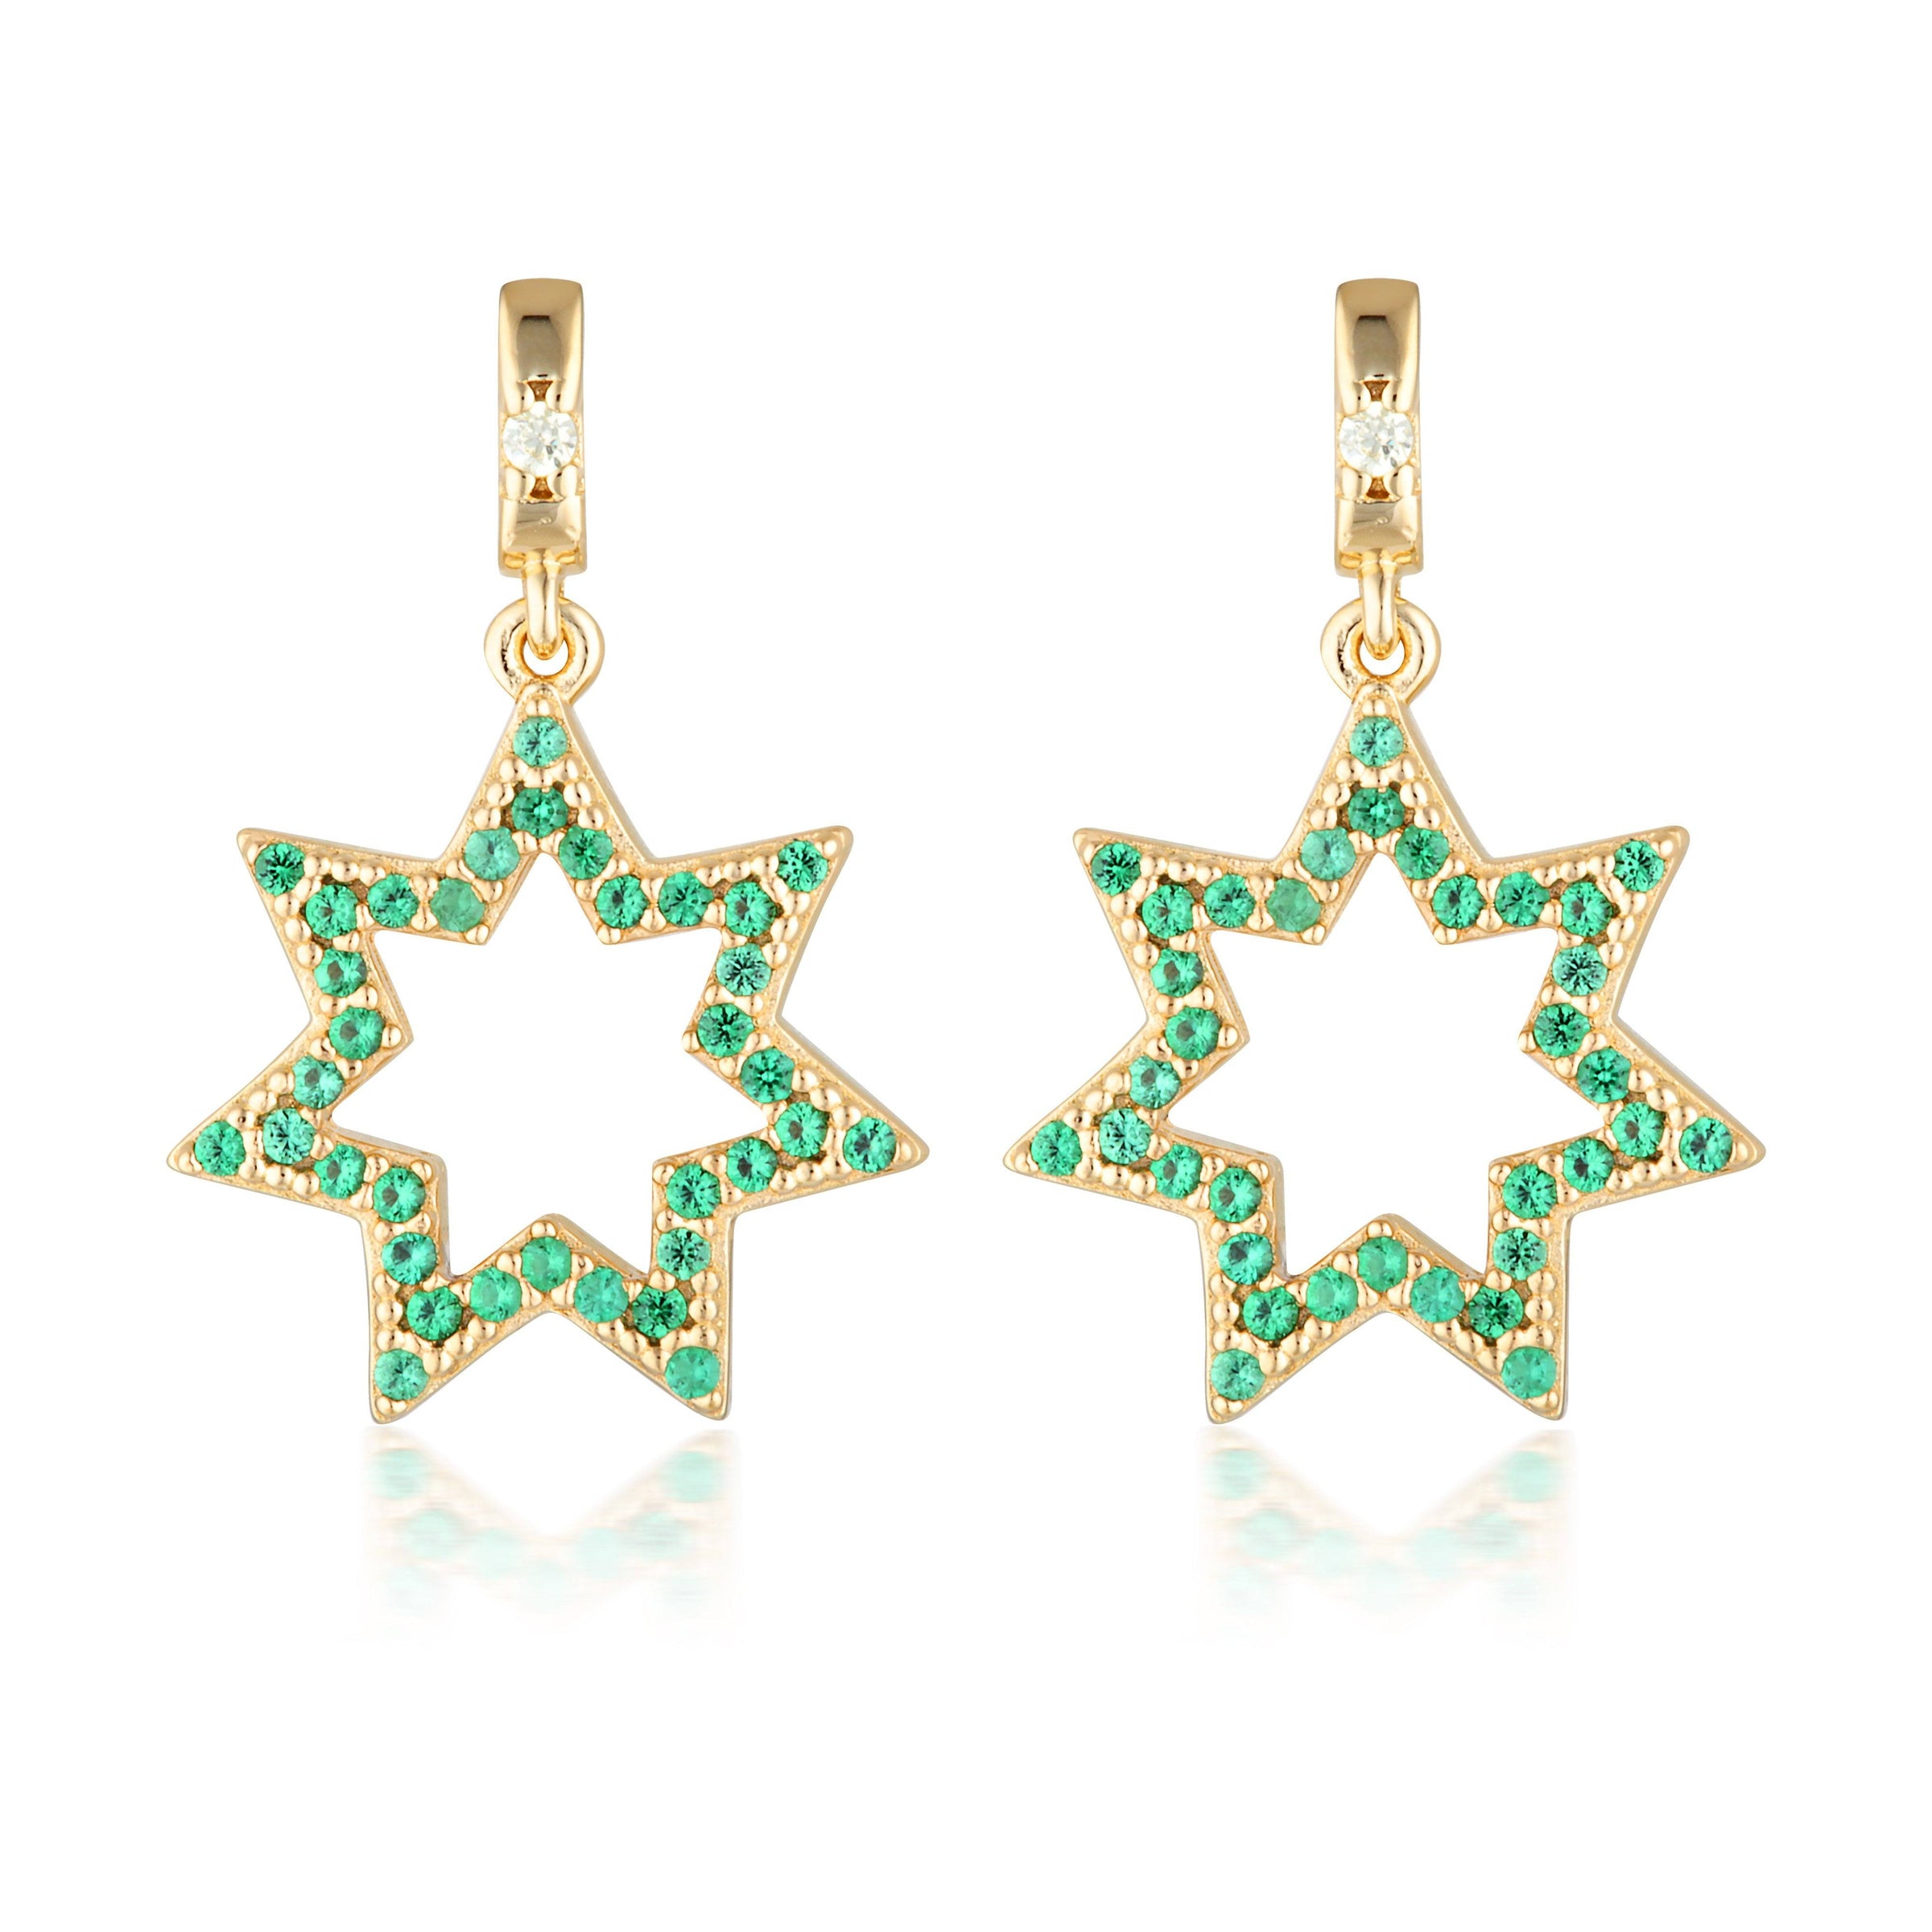 GEORGINI COMMONWEALTH COLLECTION STAR EARRINGS GOLD Bevilles Jewellers 